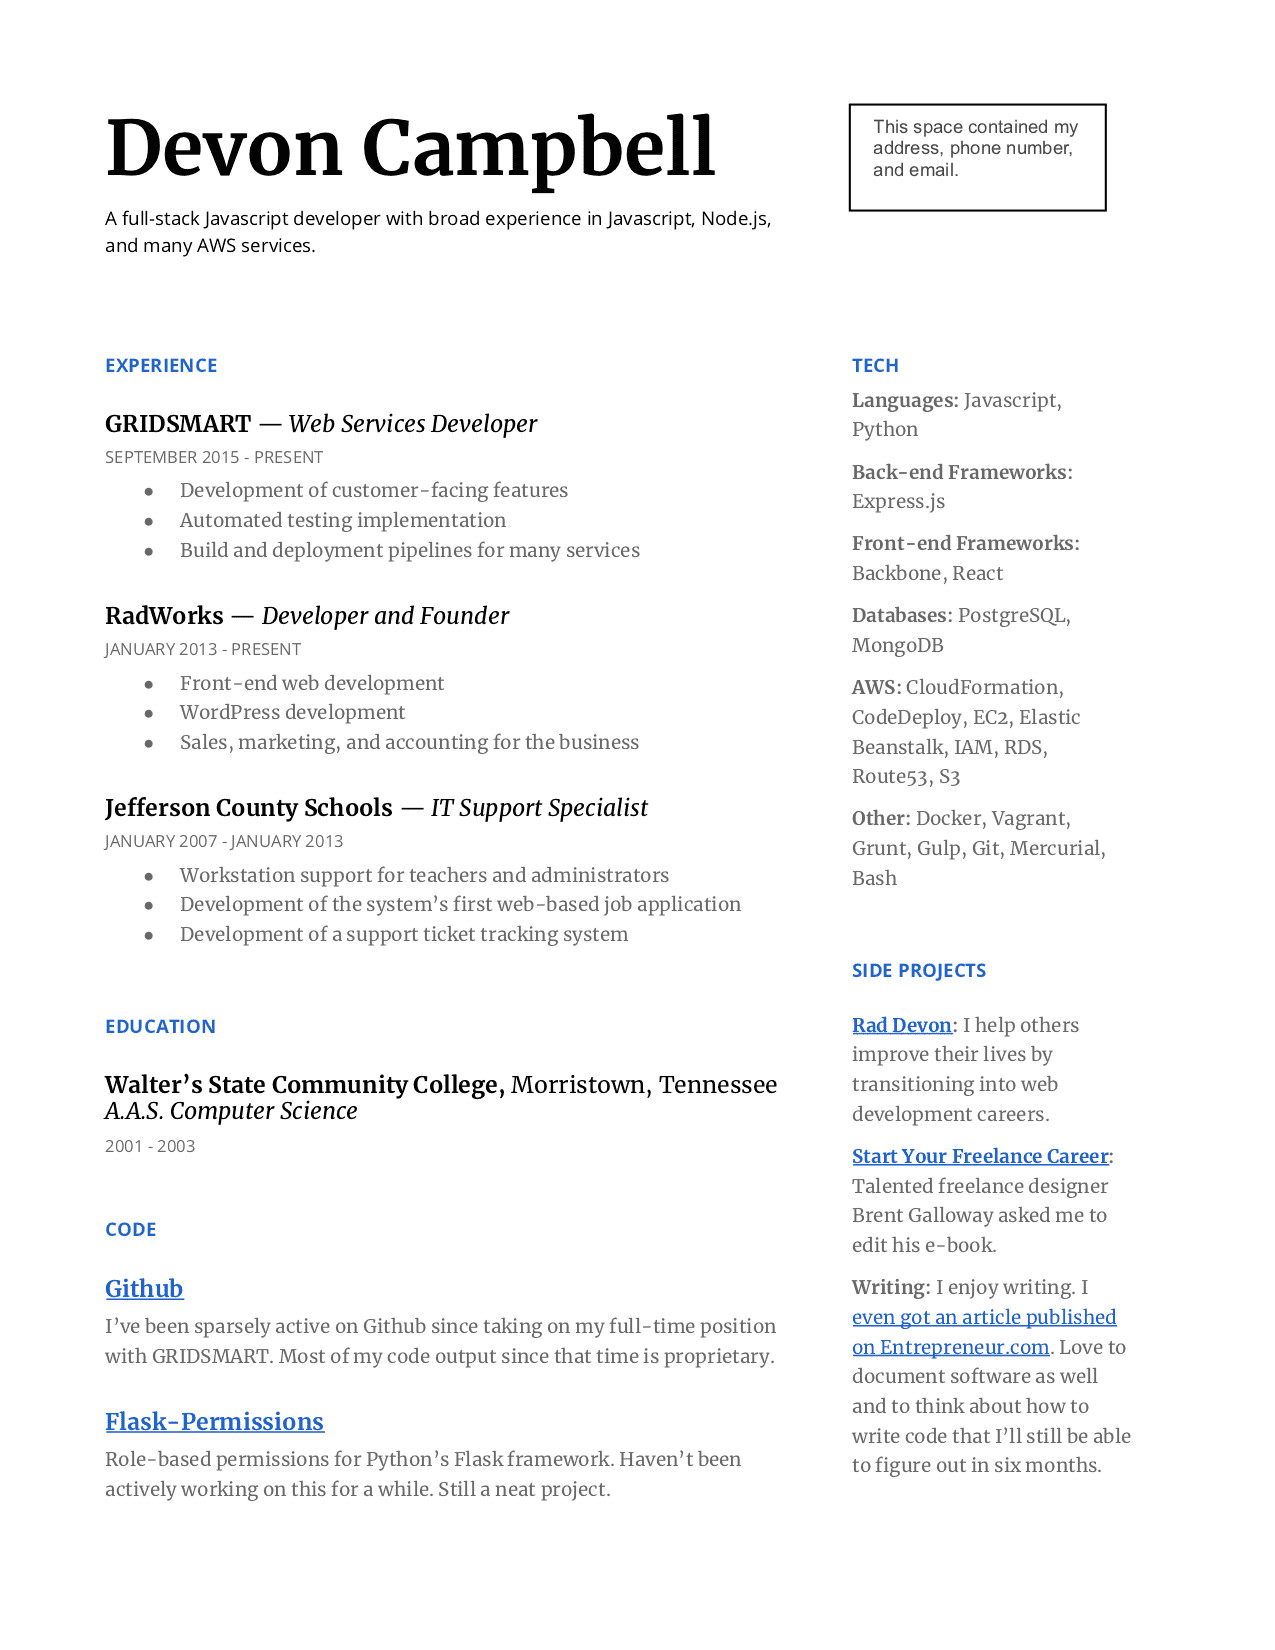 how to build your web developer resume with or without experience